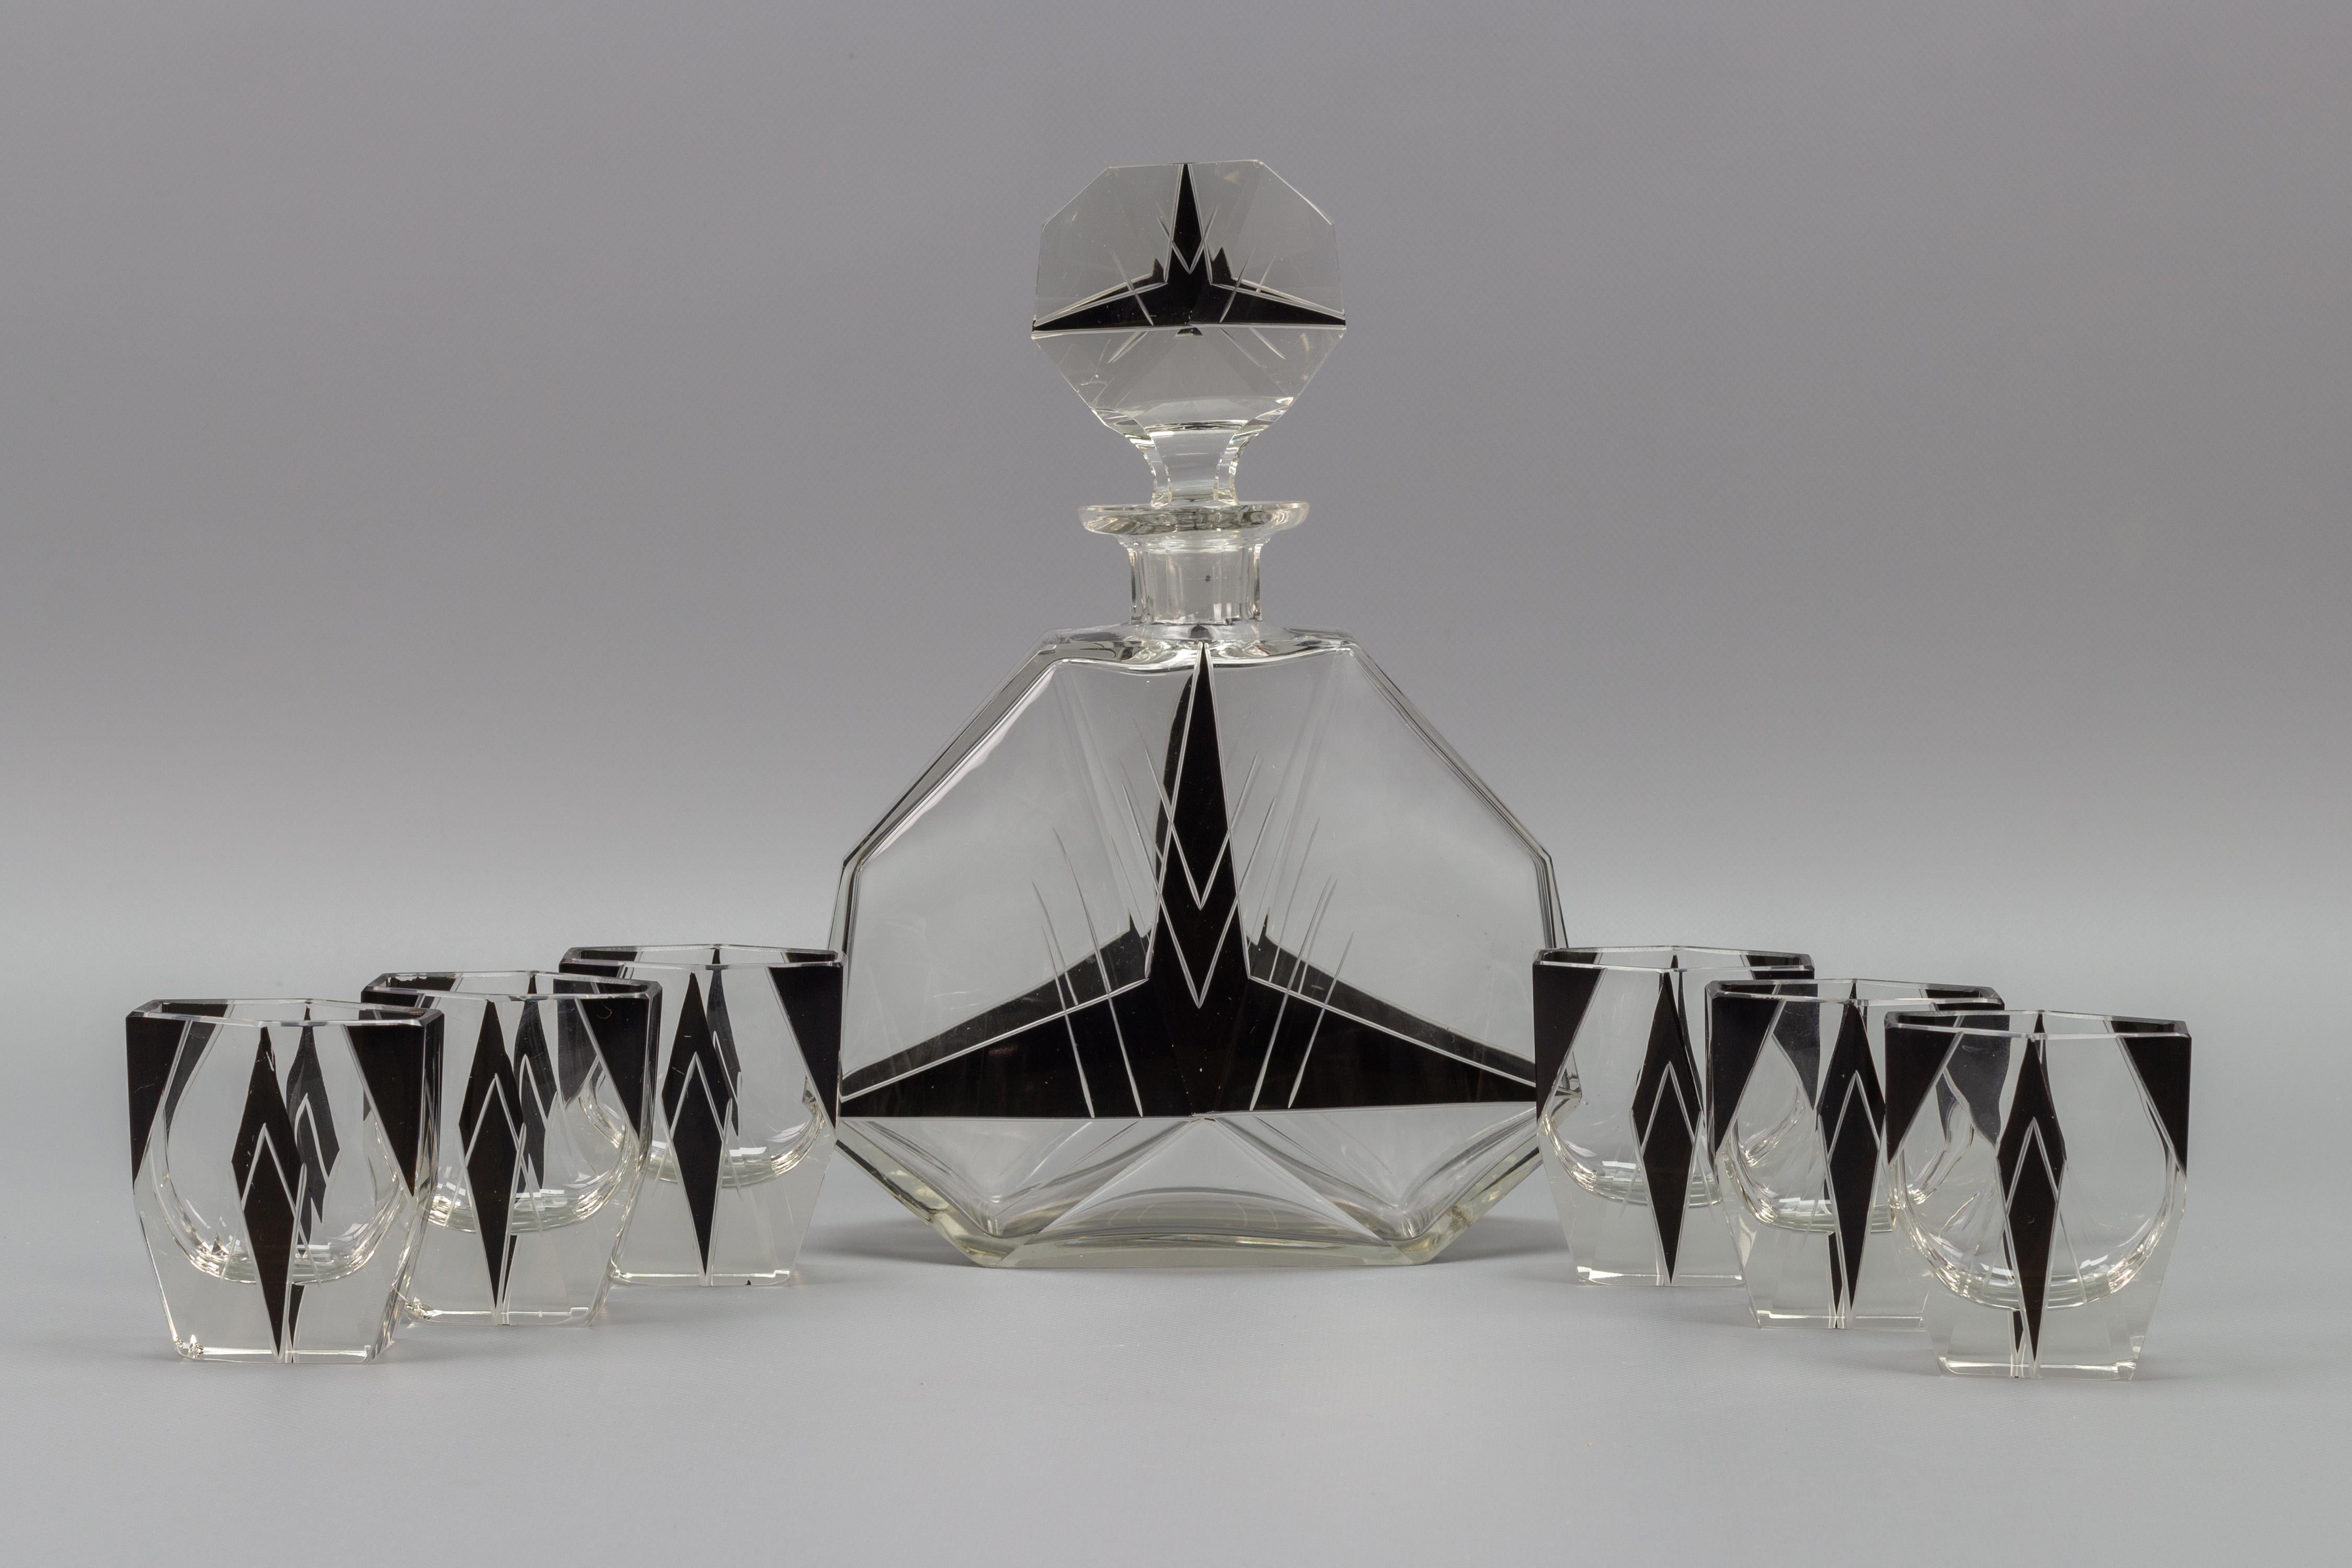 Absolutely gorgeous Art Deco Czech Bohemian beautifully shaped heavy glass decanter with stopper and six glasses, all with black enamel geometric design, circa the 1930s.
Dimensions:
Decanter (including stopper): Height 24.5 cm / 9.64 in, width 18